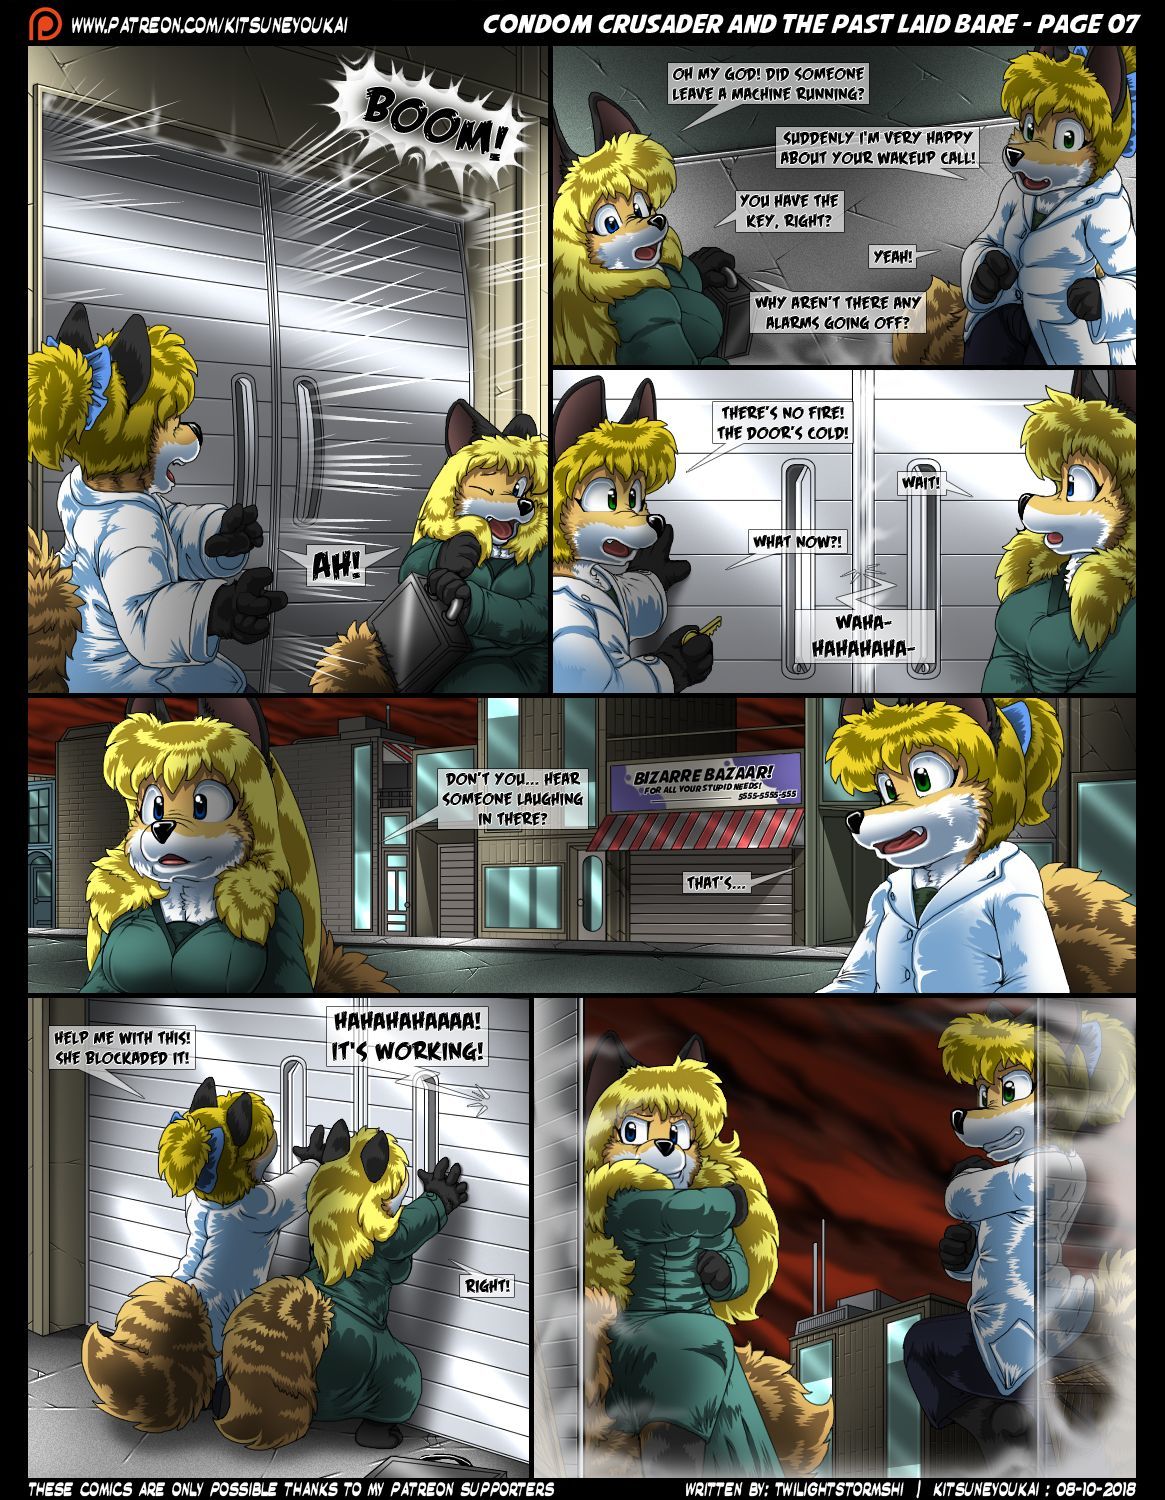 Condom Crusader and the Past Laid Bare by kitsuneyoukai page 7